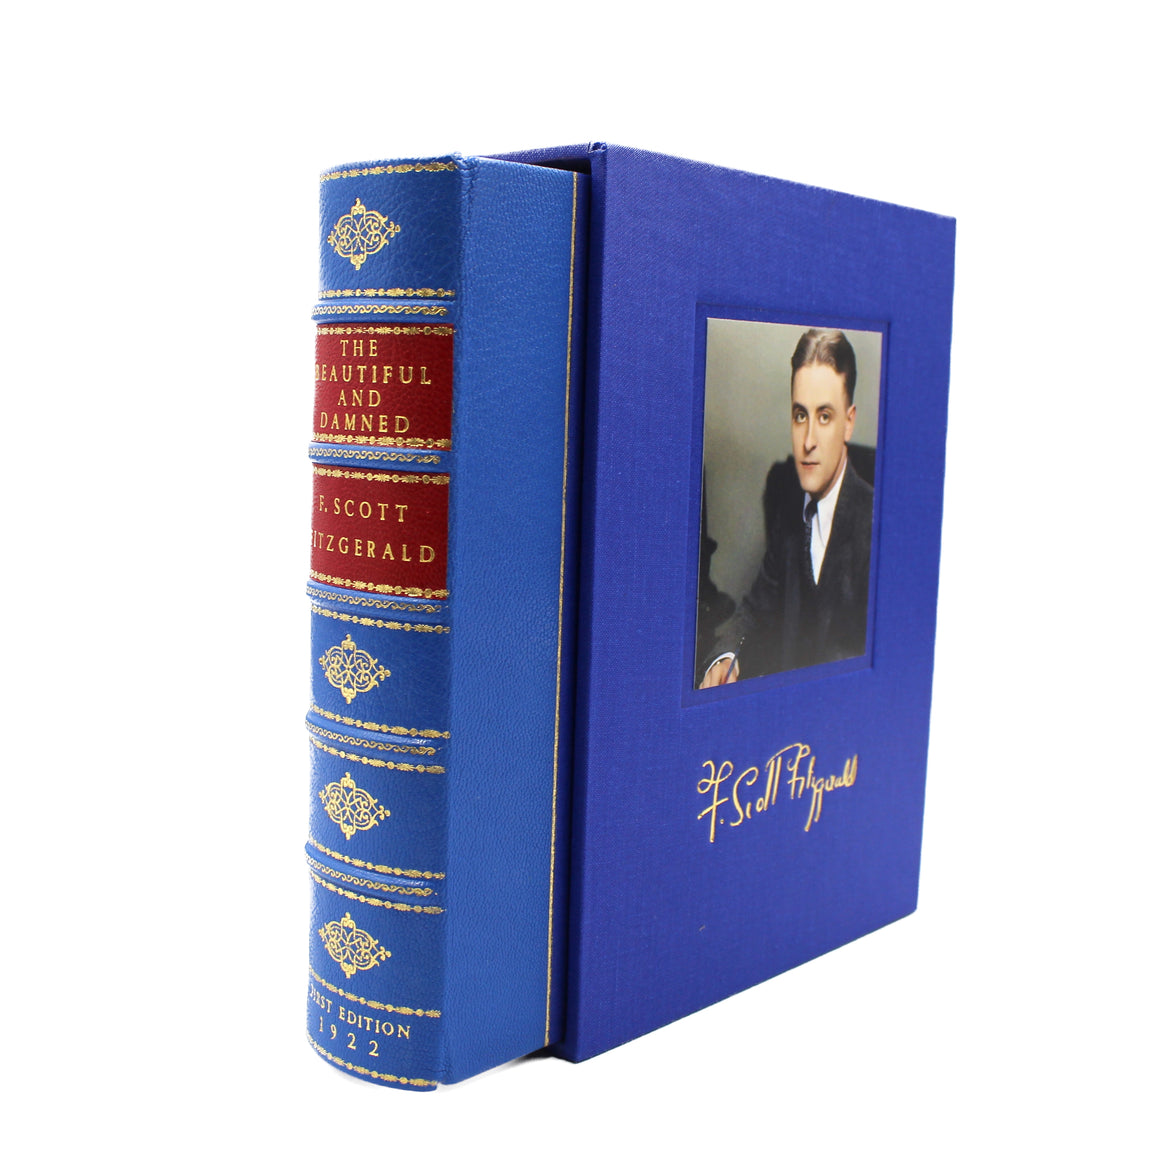 The novel and it's clamshell, with the novel angled so that the spine is visible. The slipcase is facing forward, showing off Fitzgerald's facsimile signature in gold ink under an inset portrait. The spine of the Novel is blue and red with gold gilding.